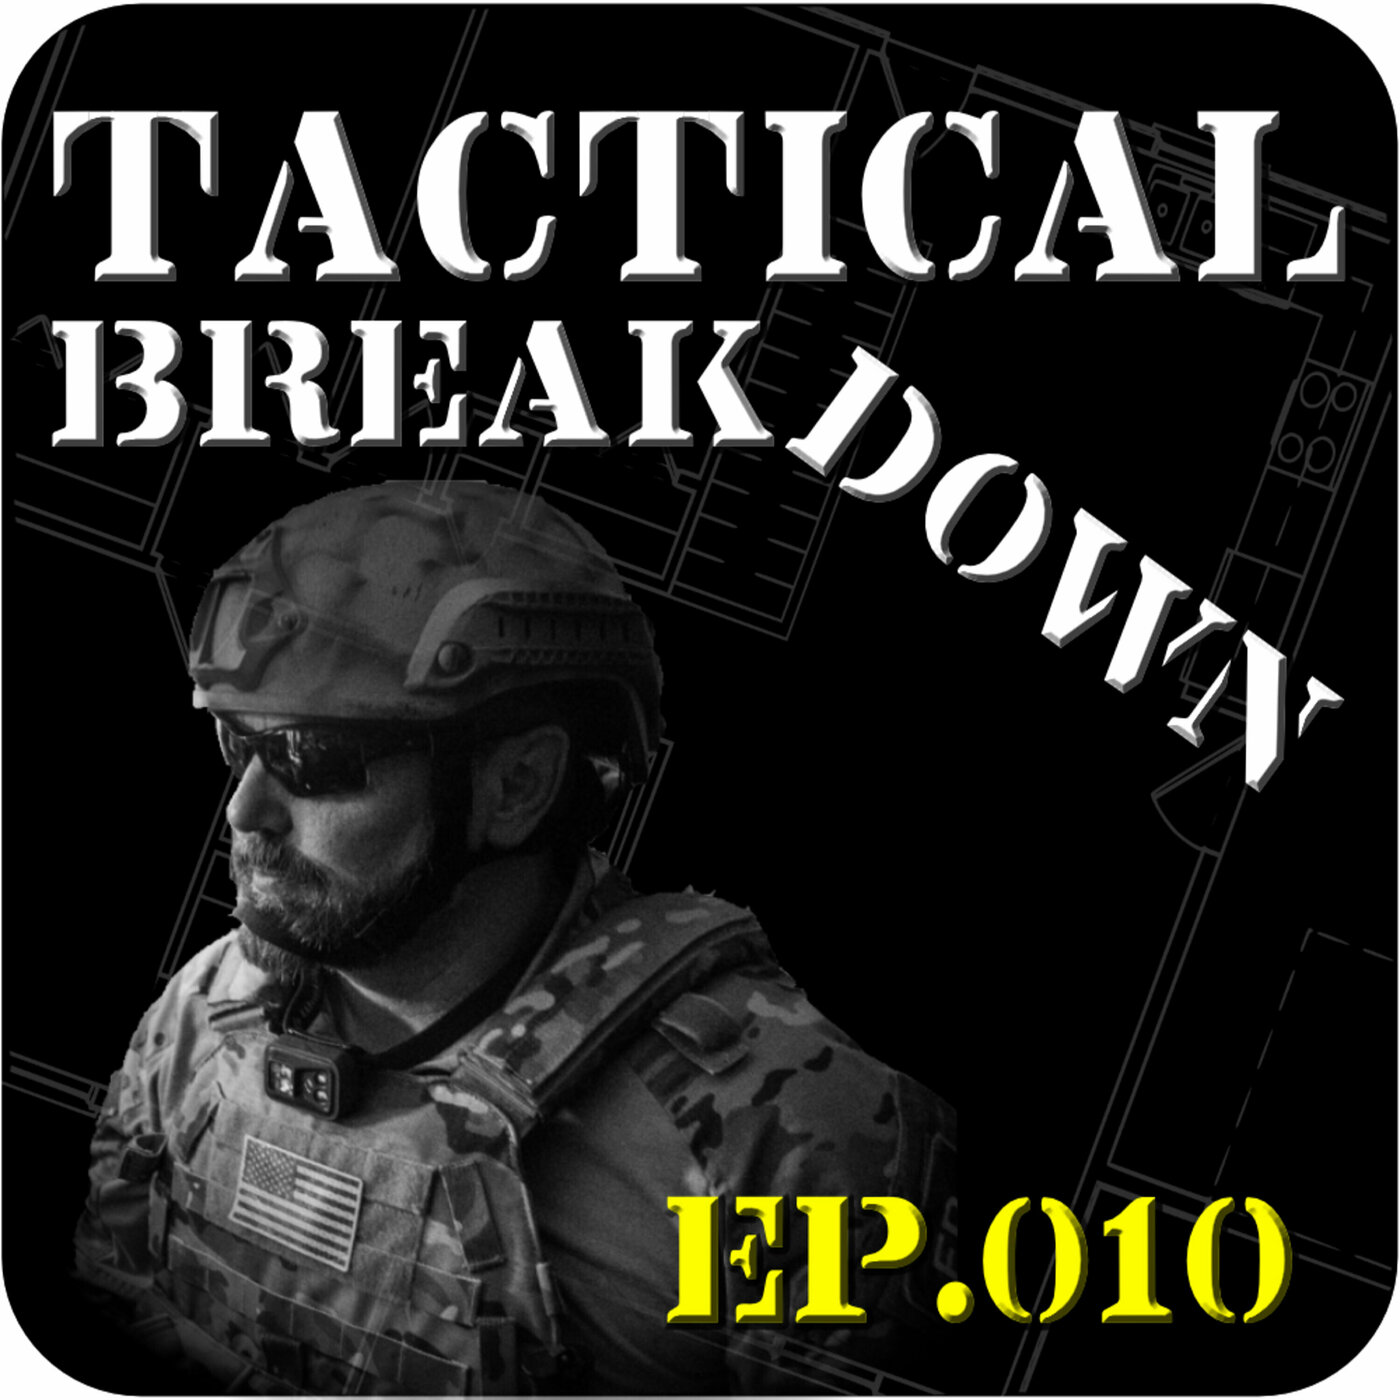 TACMED (Part 1) - TCCC, Training, and Tactics for First Responders with Dr. Mike Simpson